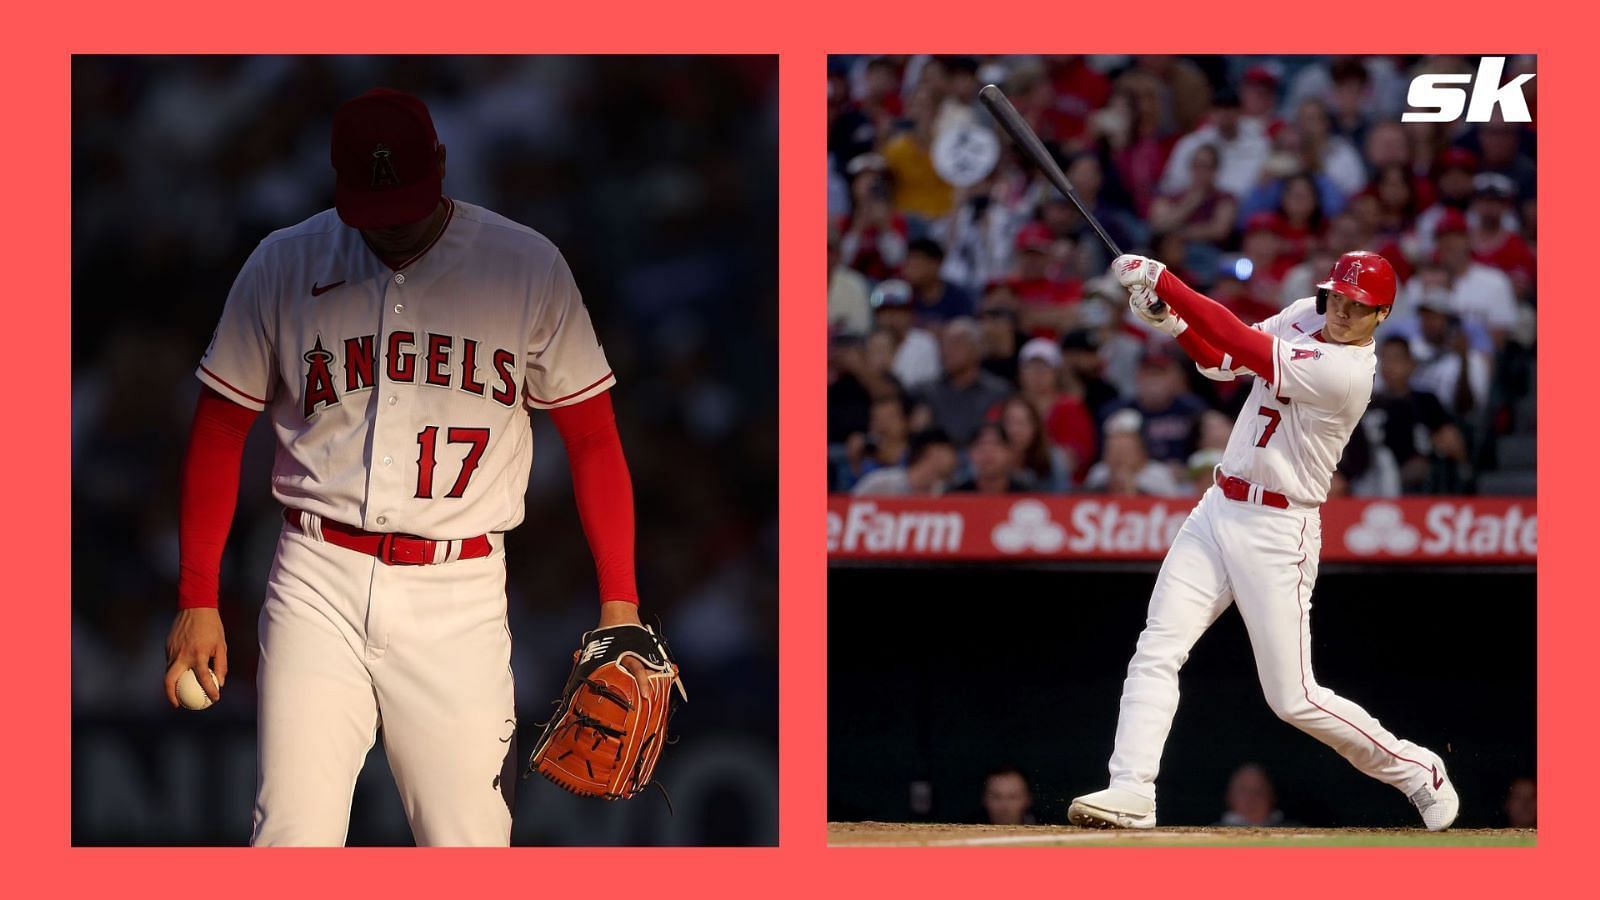 Los Angeles Angels fans gobsmacked that Shohei Ohtani&rsquo;s batting average in games he&rsquo;s pitched this season